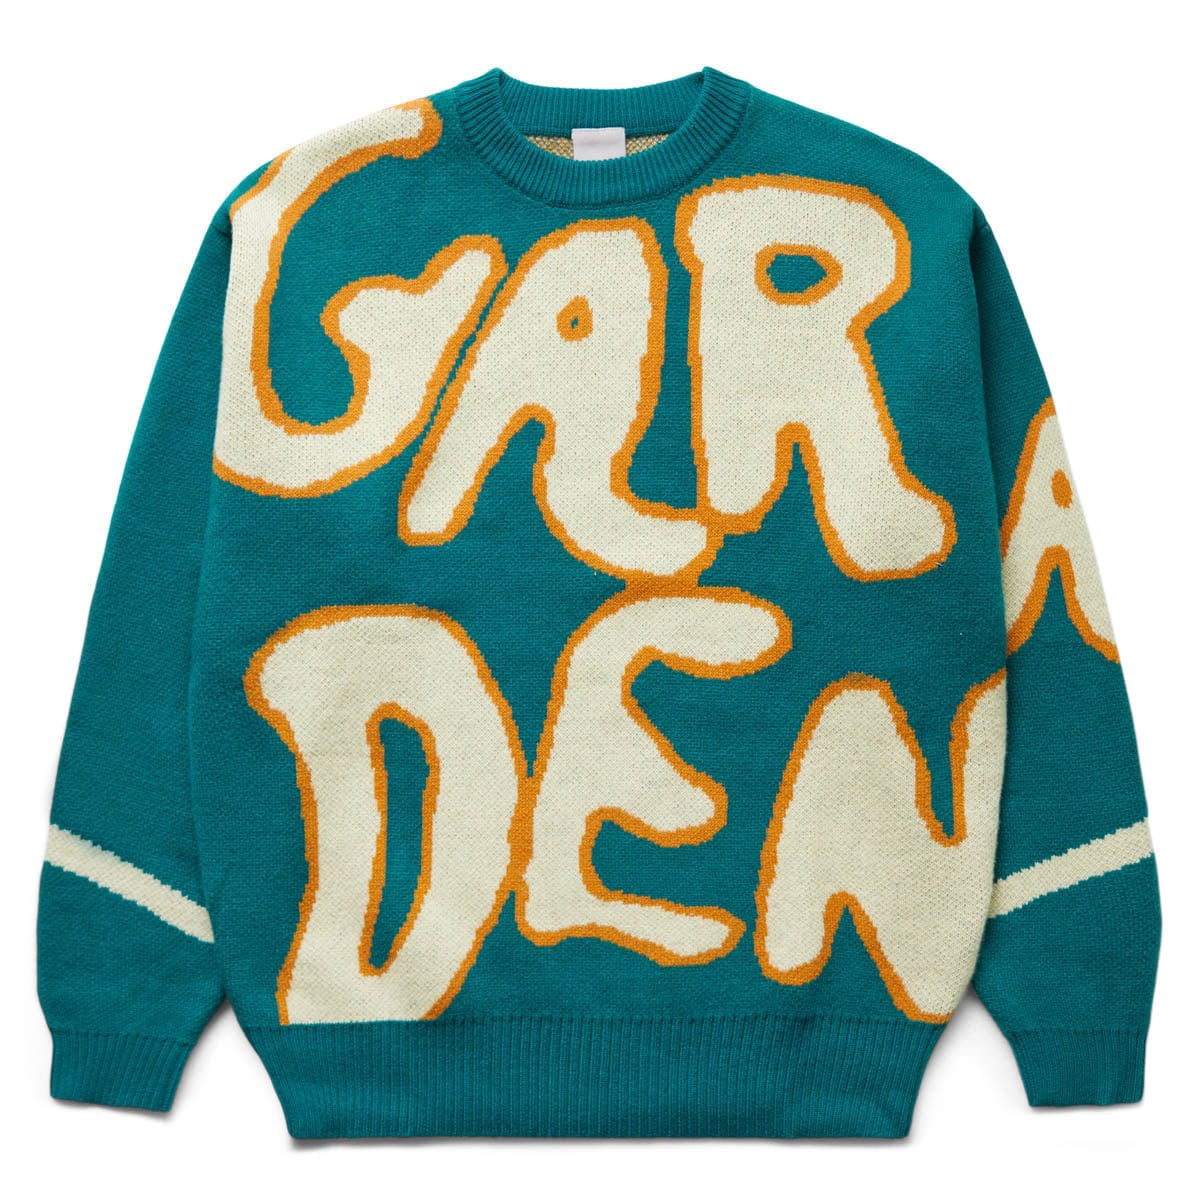 Perks and Mini Knitwear COMMUNITY GARDEN KNITTED CREWNECK